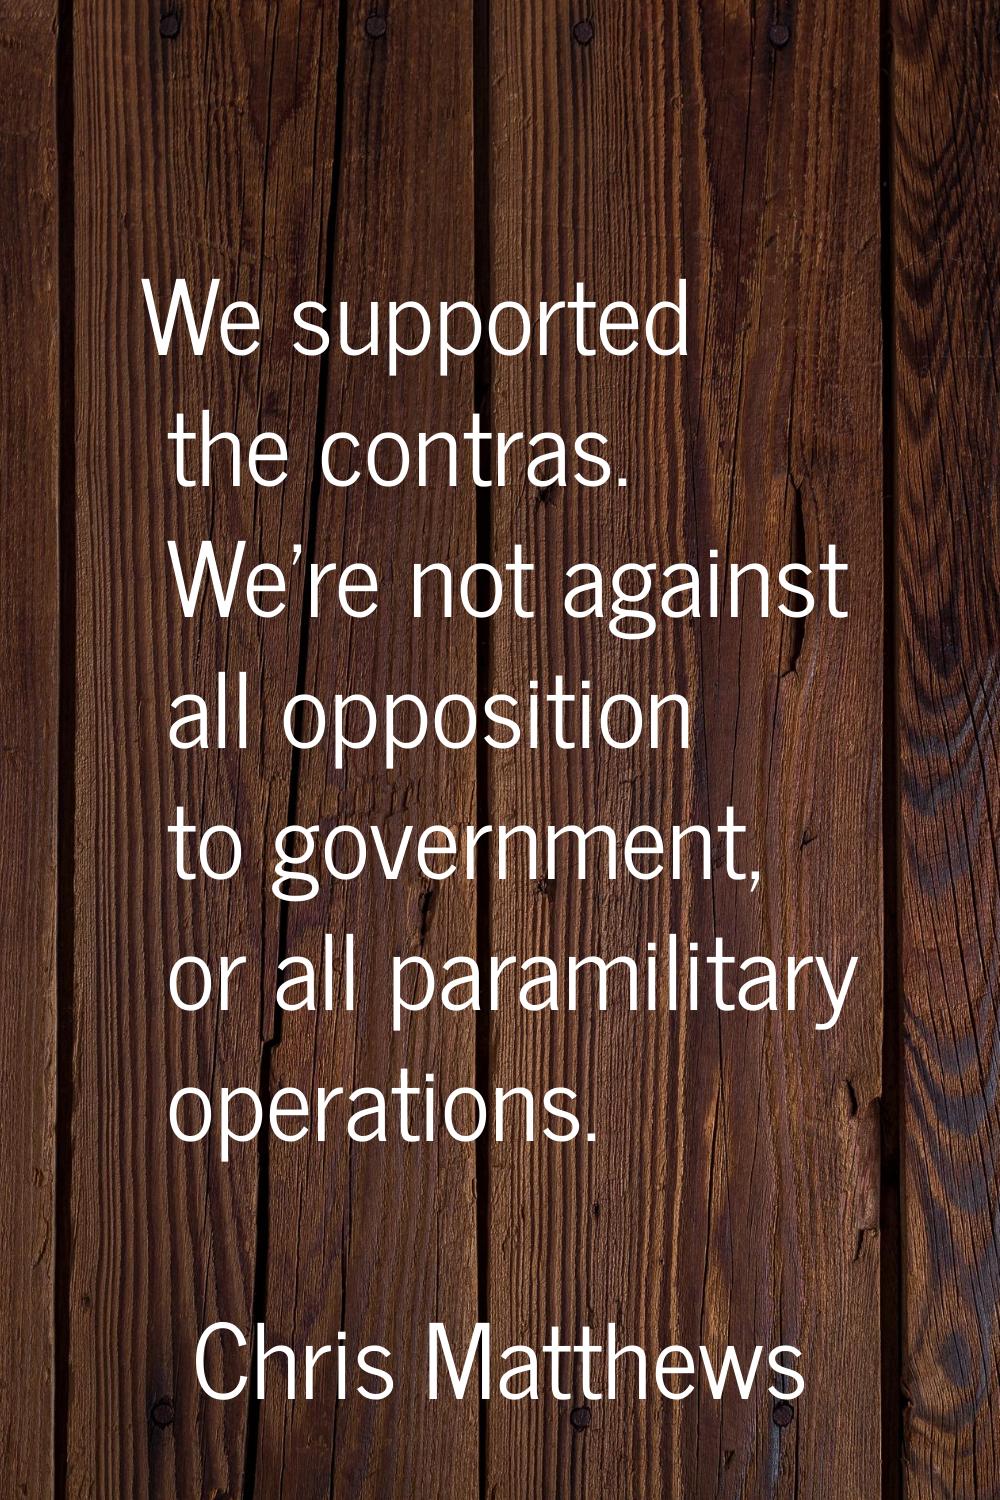 We supported the contras. We're not against all opposition to government, or all paramilitary opera